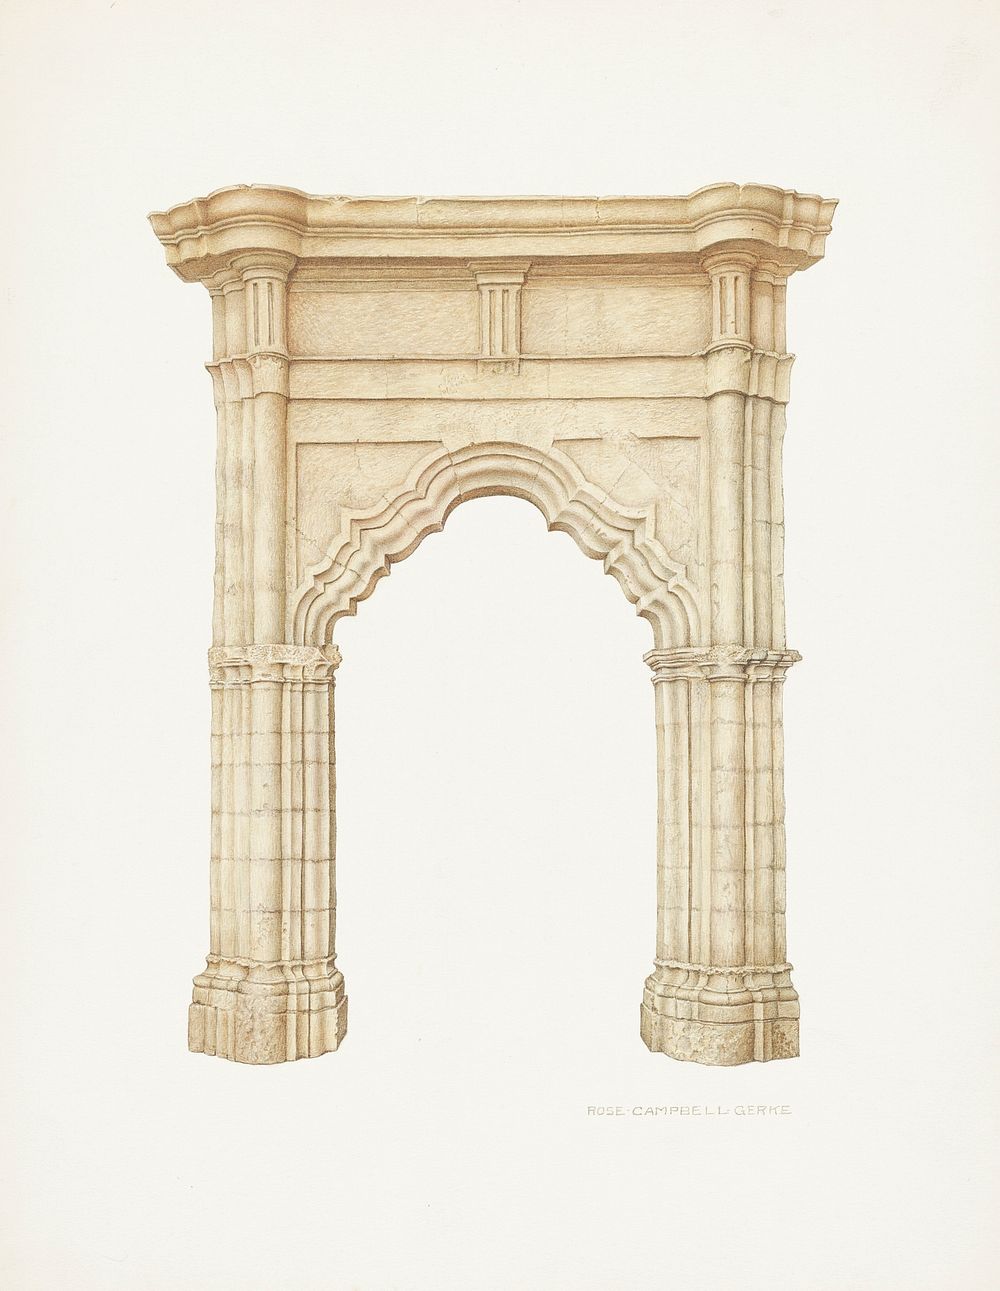 Archway (ca. 1940) by Rose Campbell&ndash;Gerke. Original from The National Gallery of Art. Digitally enhanced by rawpixel.